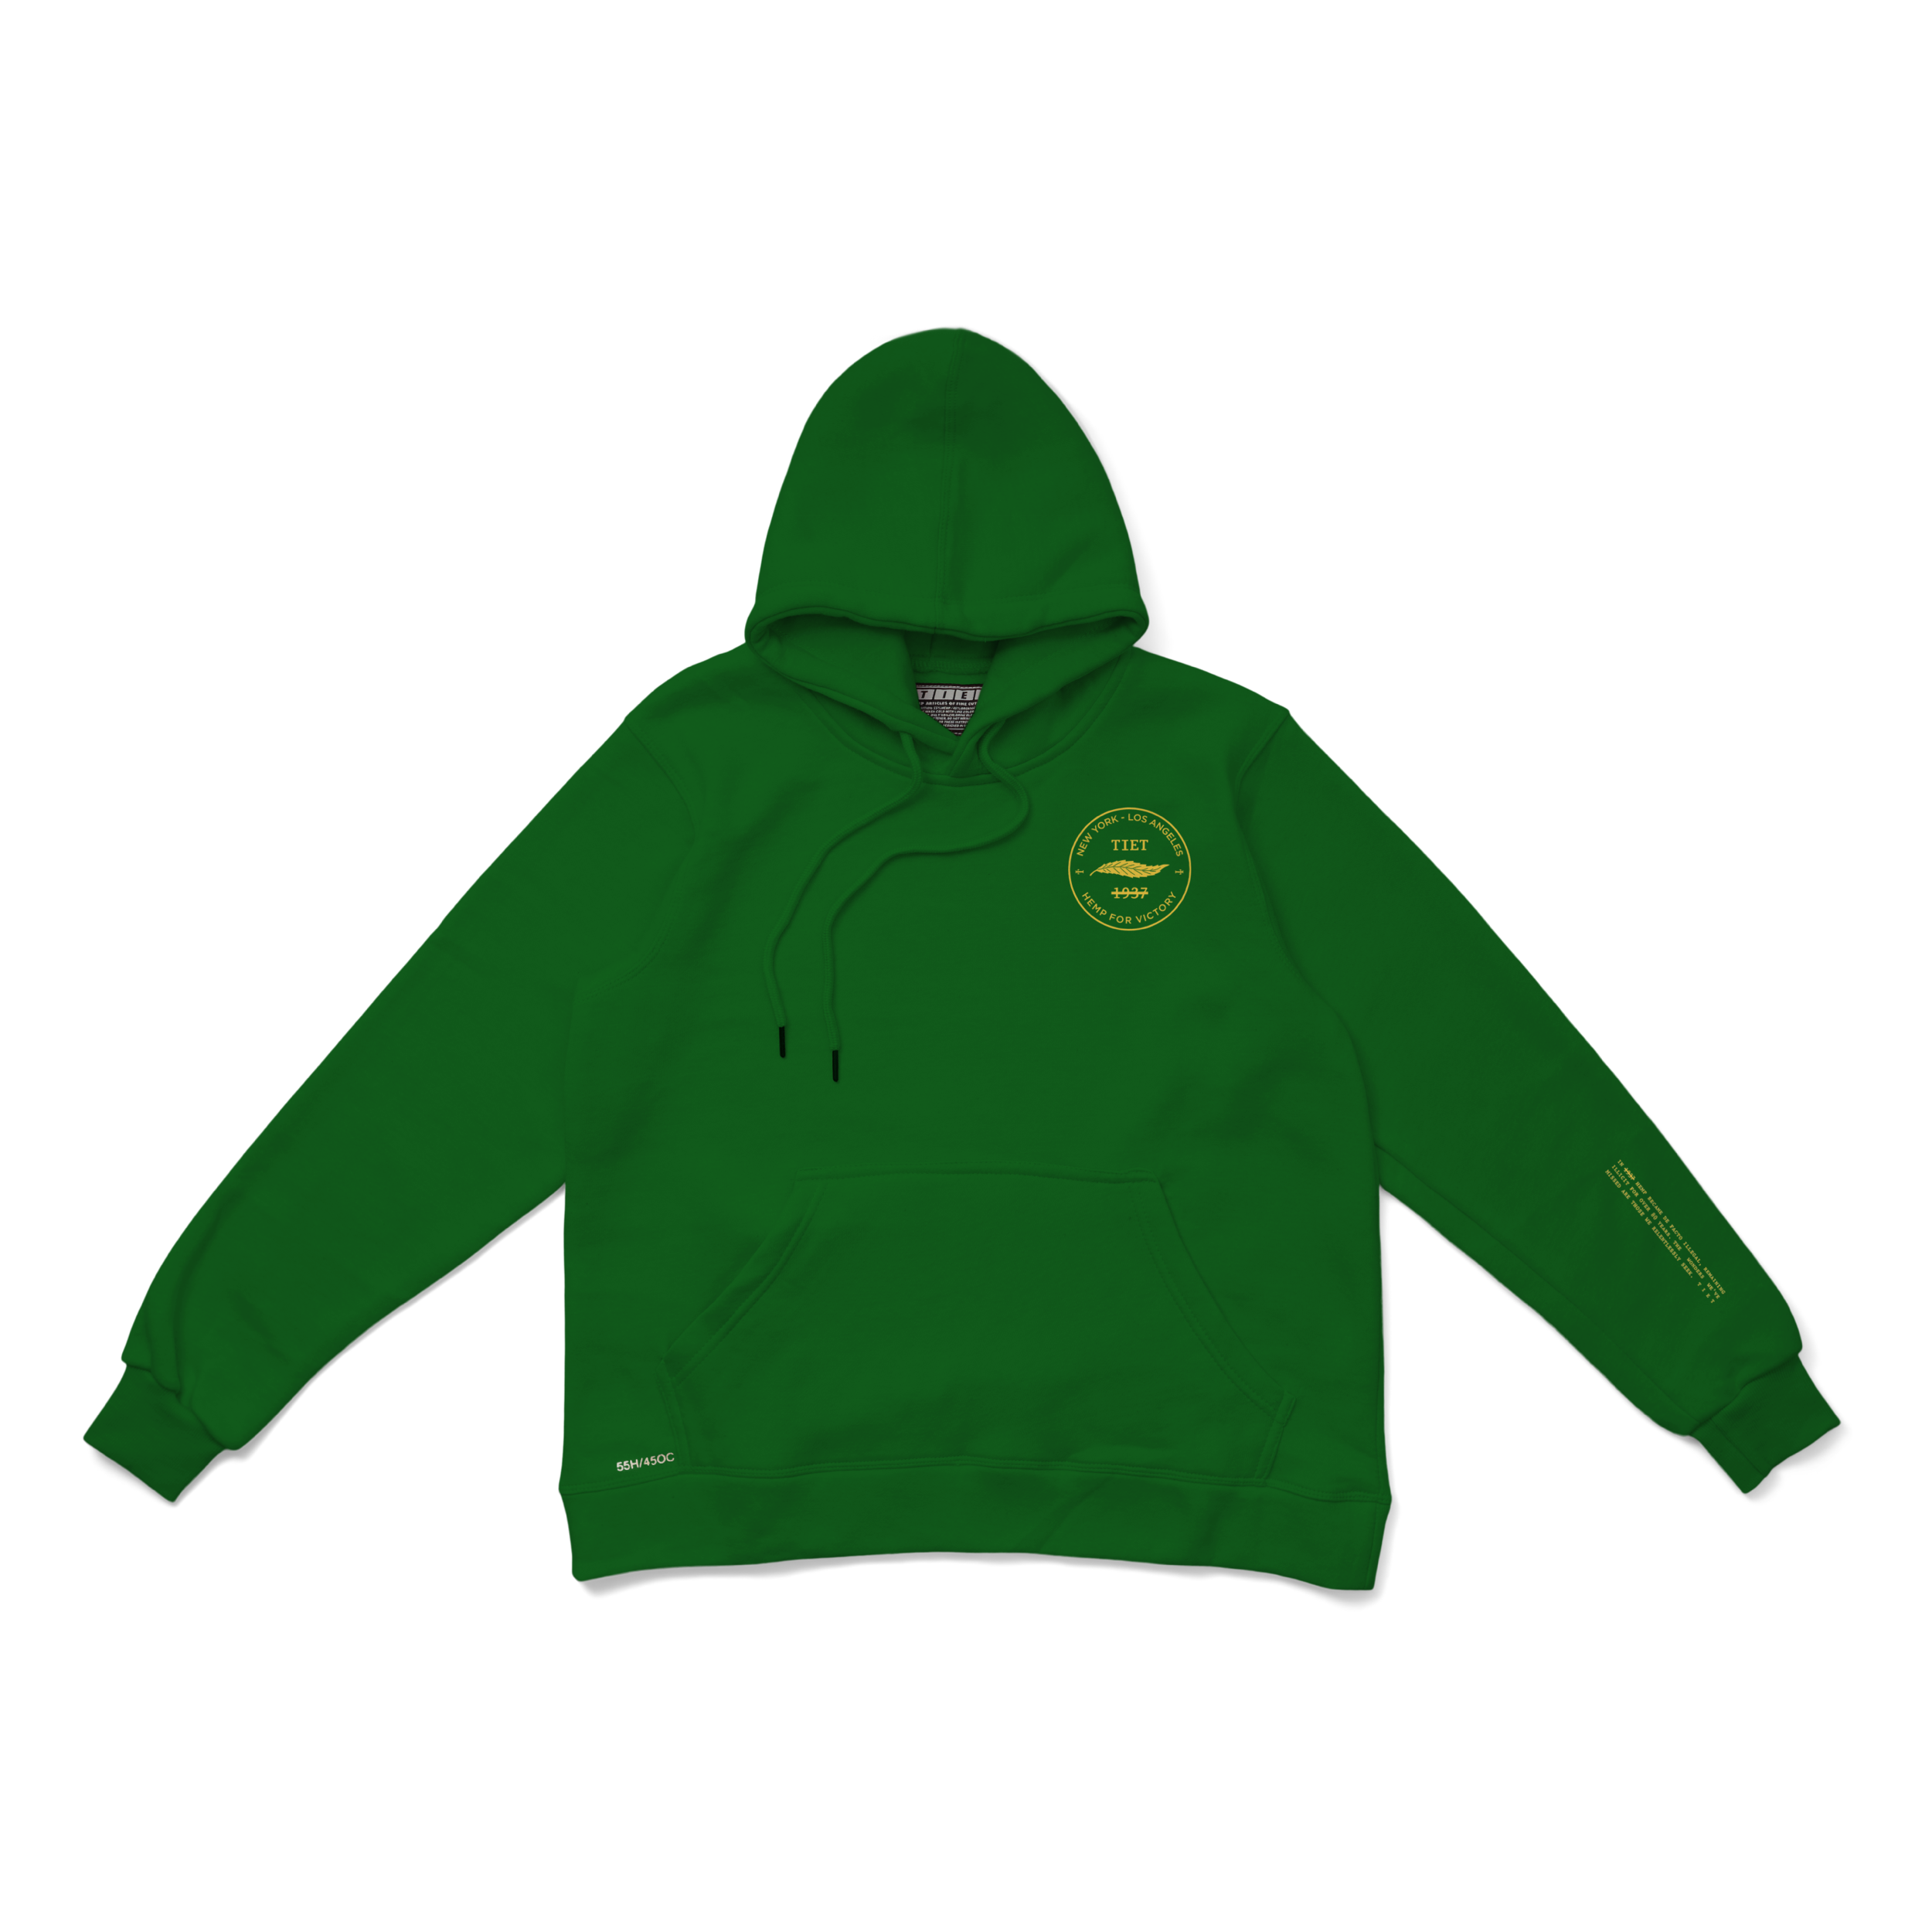 Made Gold Donna Hoodie Large / Green